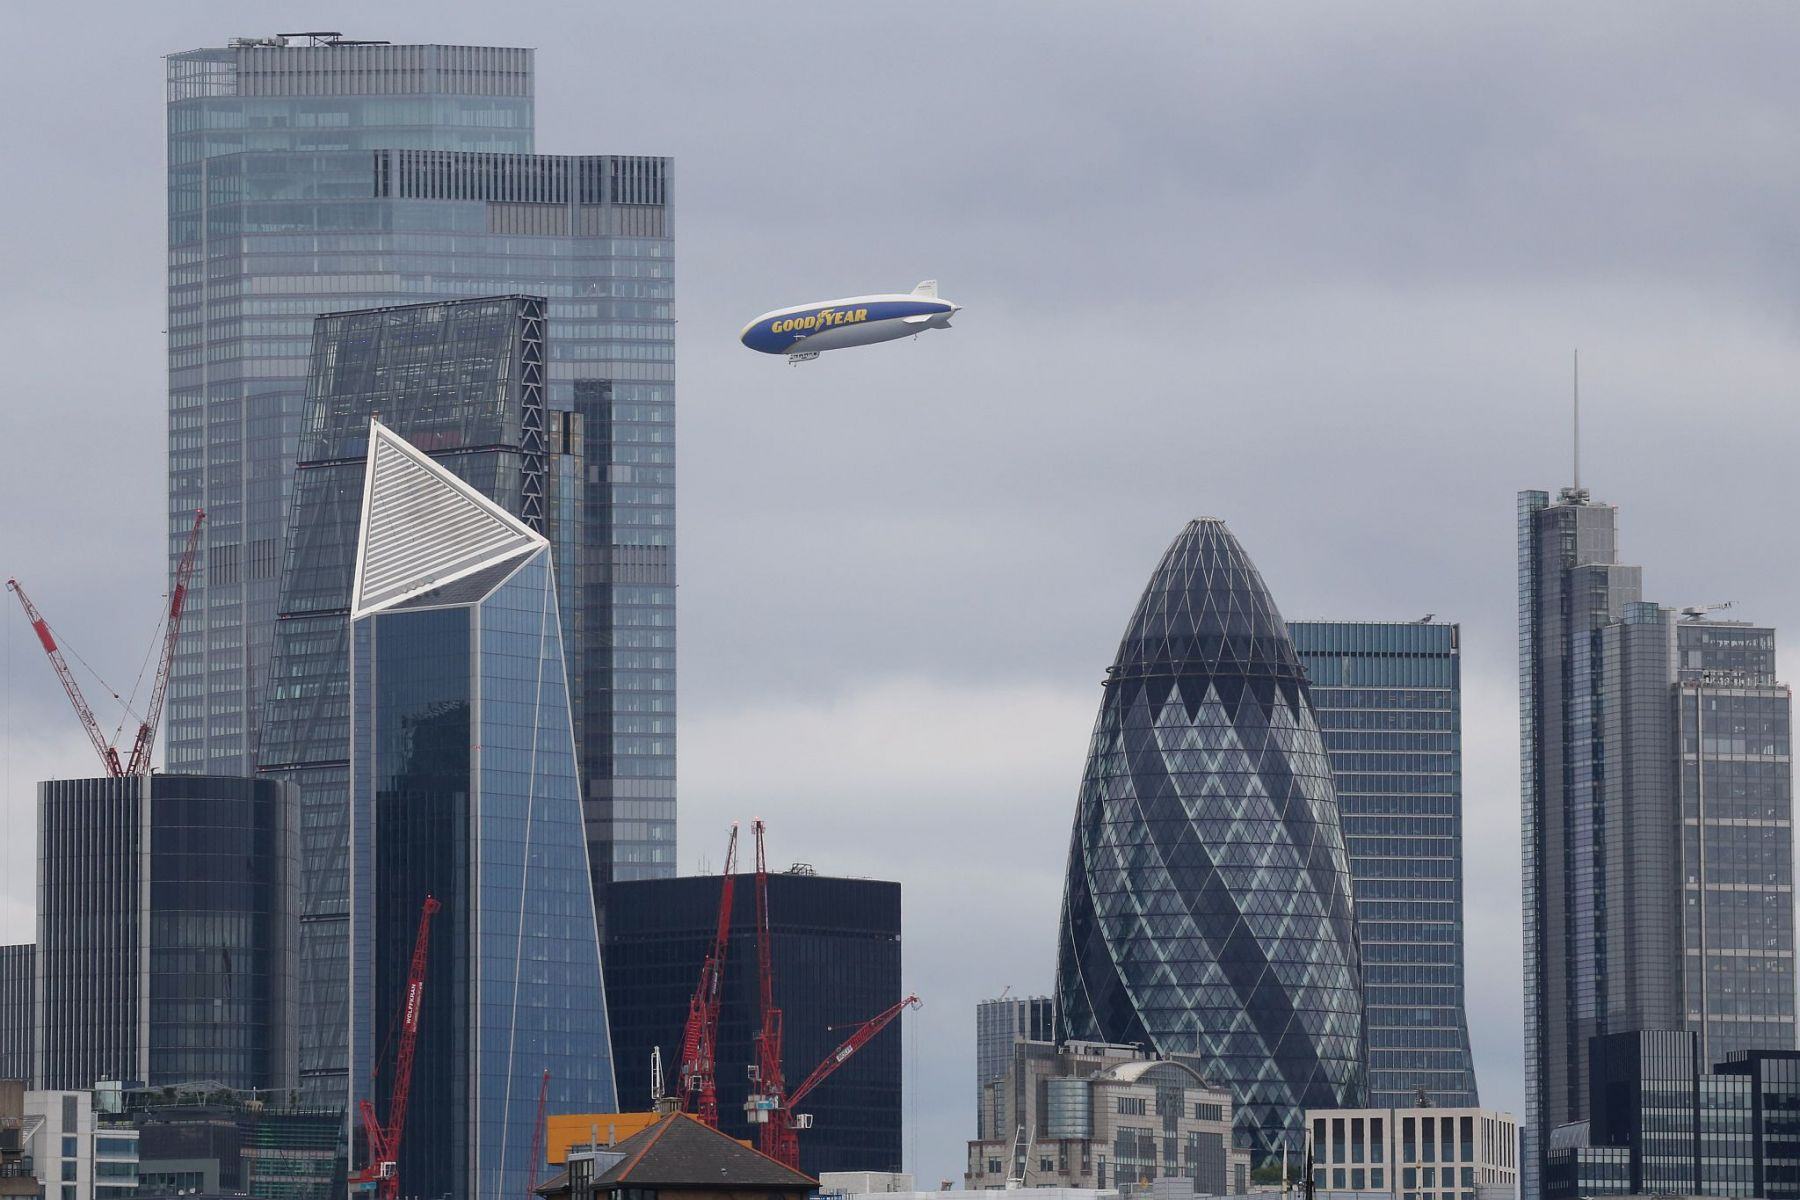 Goodyear Zeppelin Airship D-LZFN Over the Gherkin and City of London